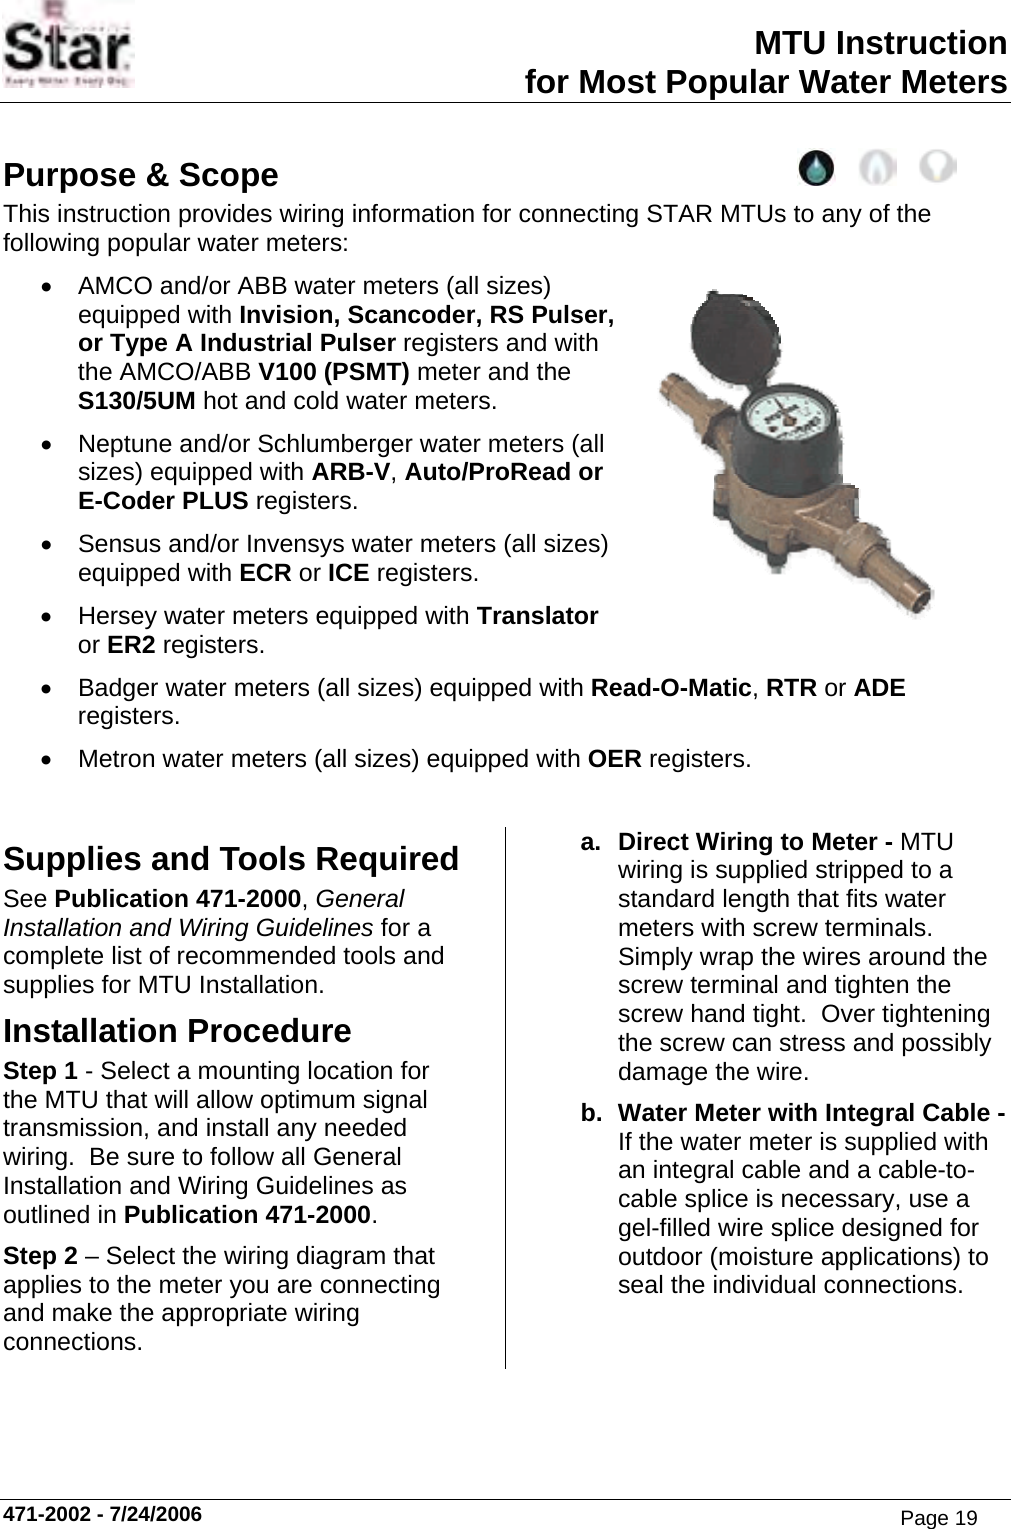 Page 19 of Aclara Technologies 09015 Transmitter for Meter Reading User Manual users manual